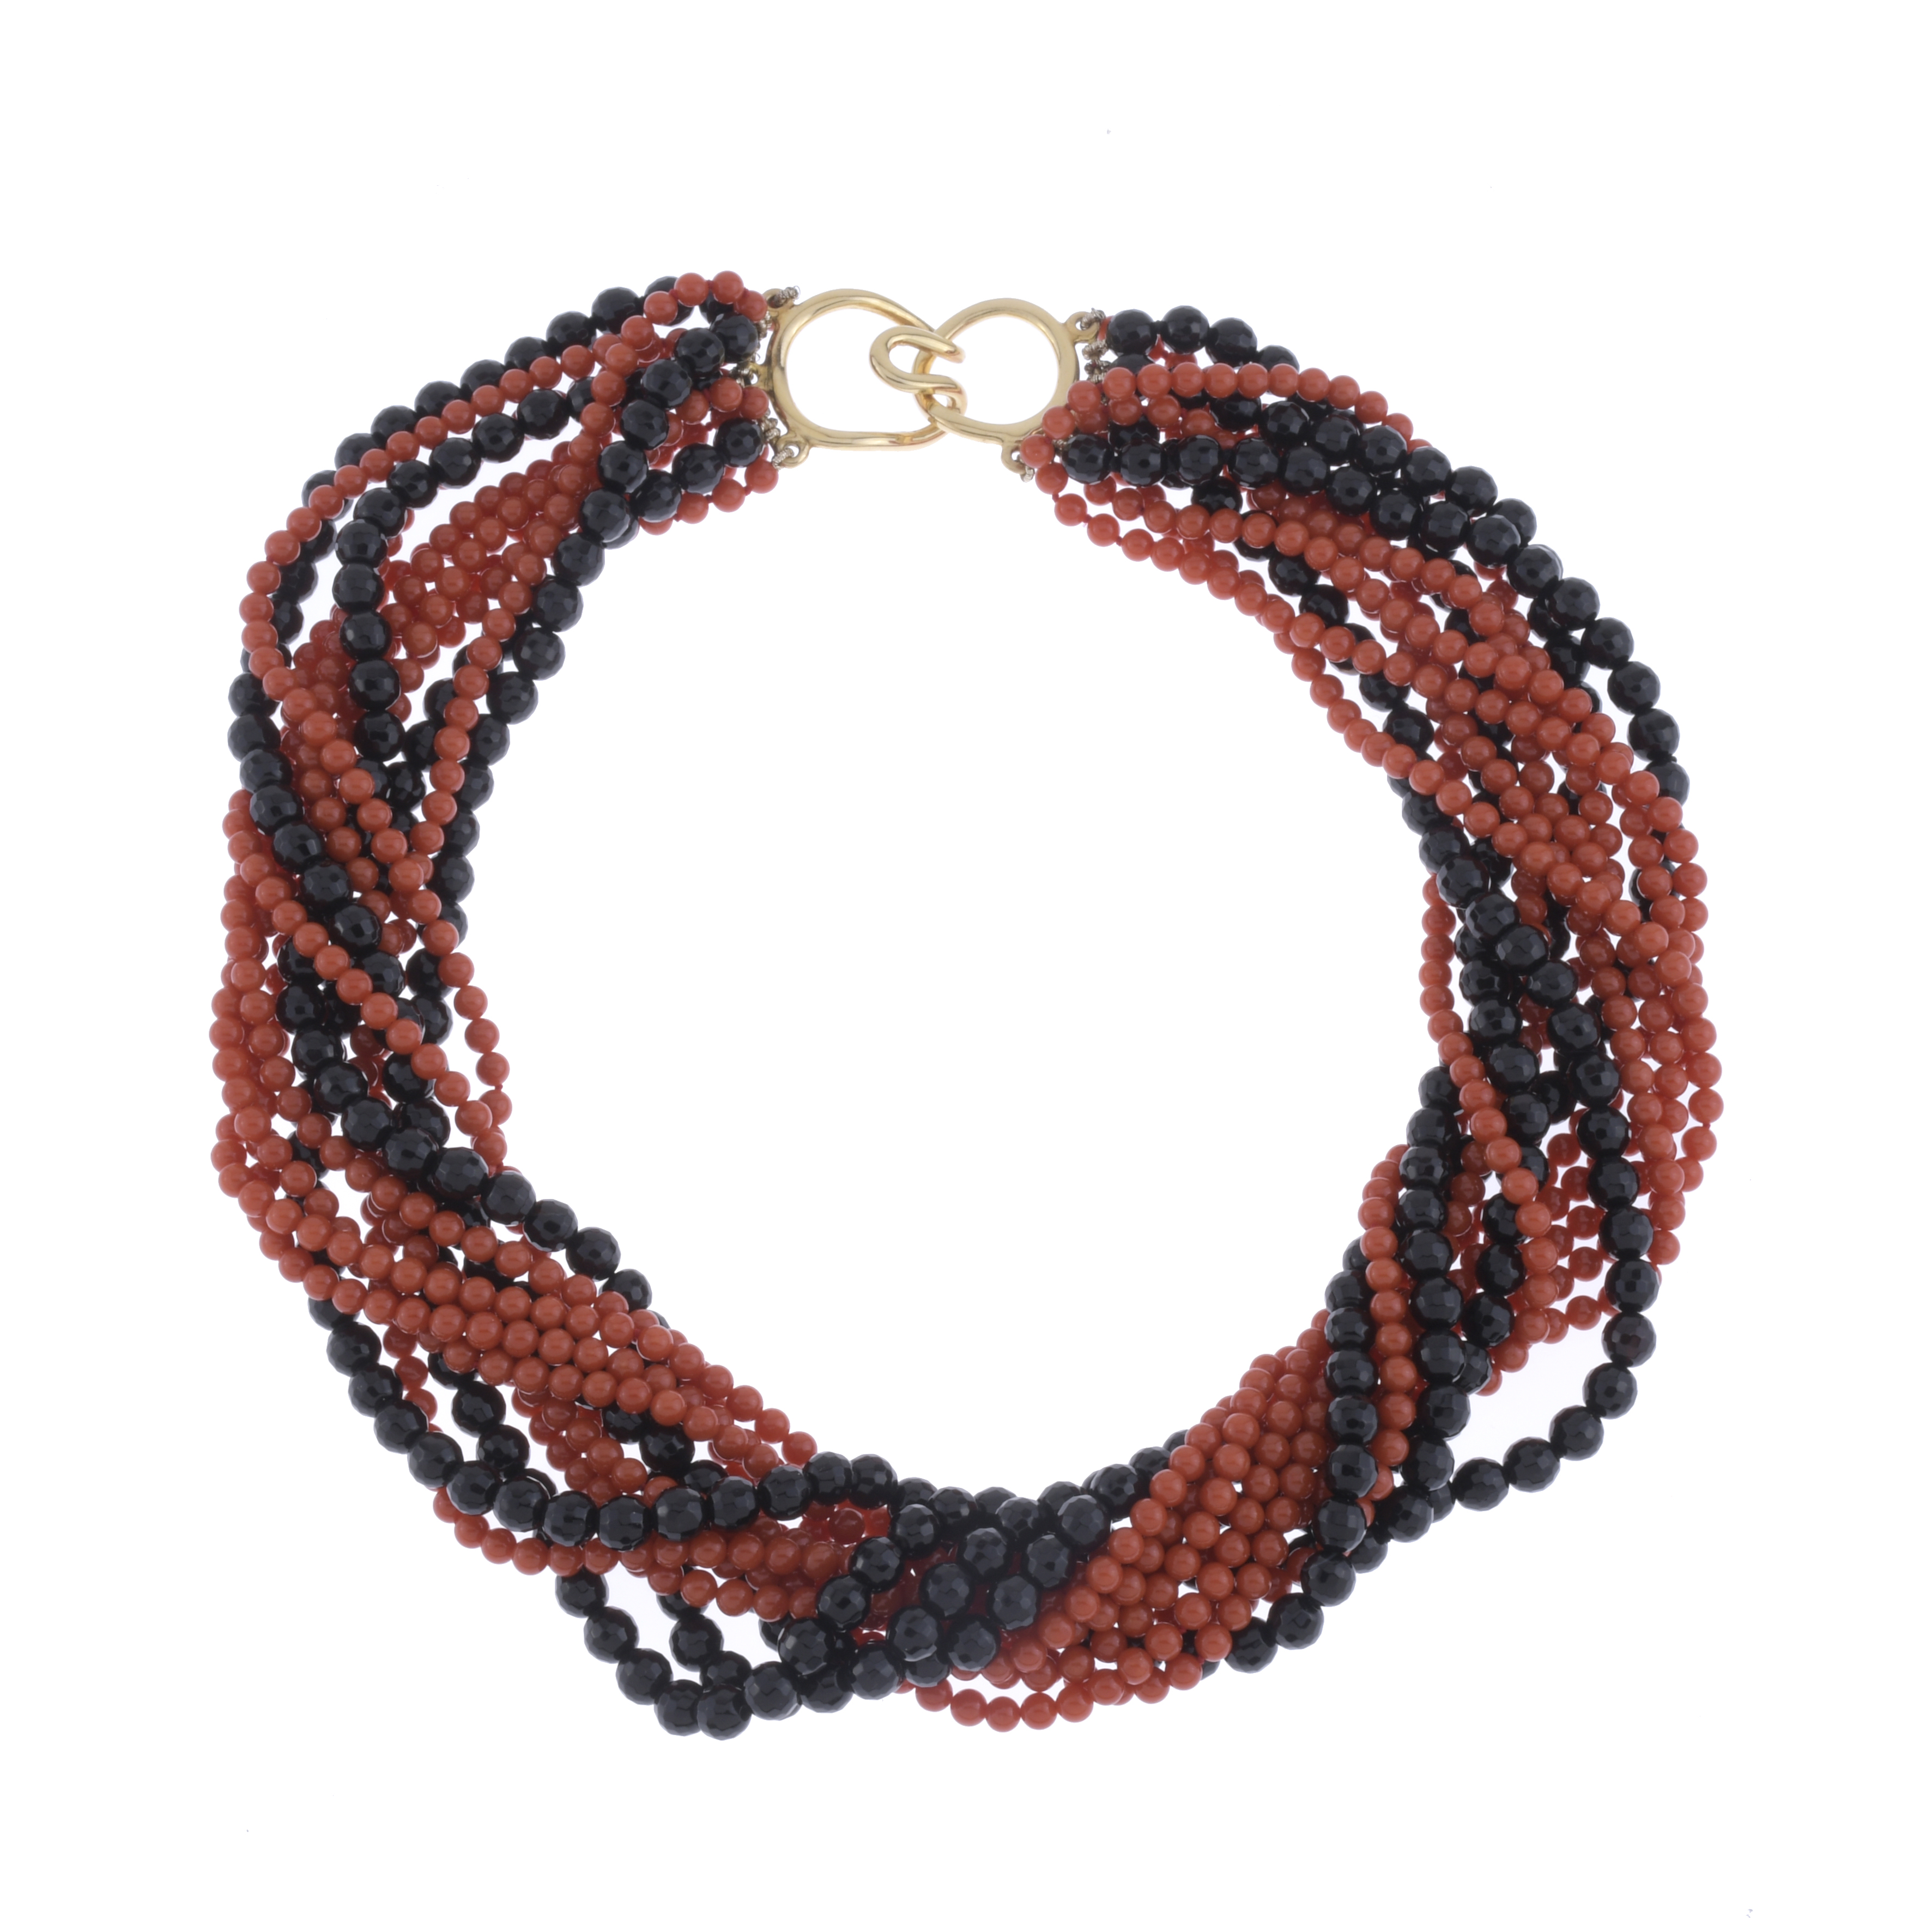 BRAIDED NECKLACE IN CARNELIAN AND ONYX.